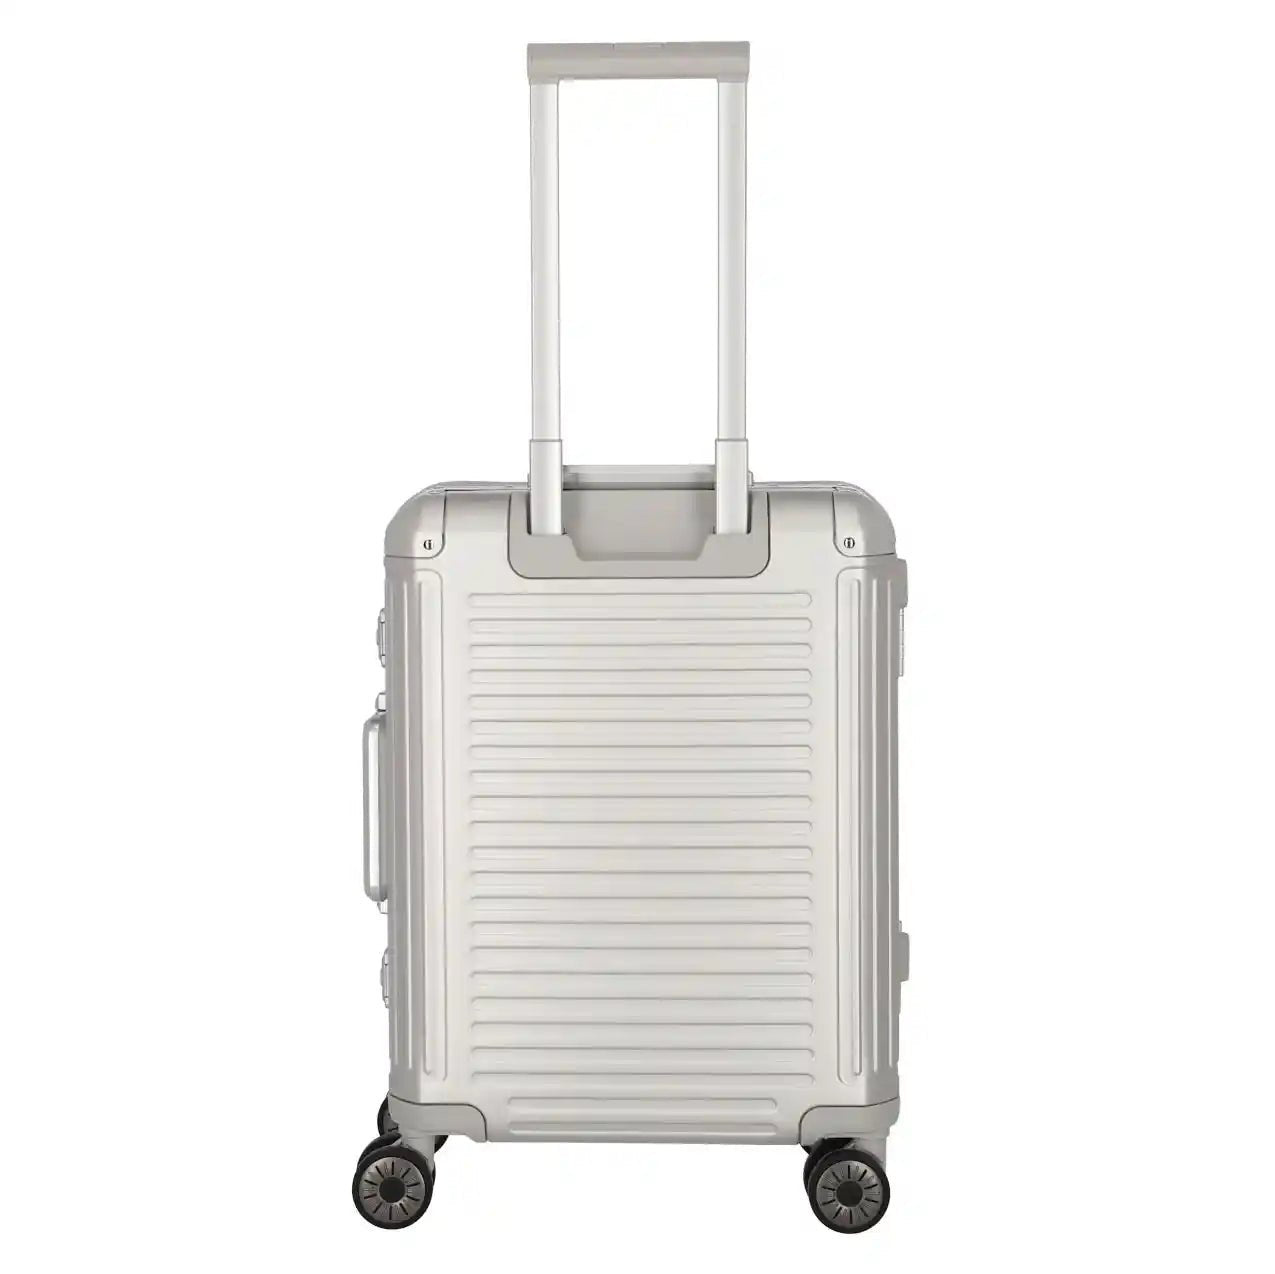 Travelite Next 2.0 4-wheel trolley S with front pocket - silver